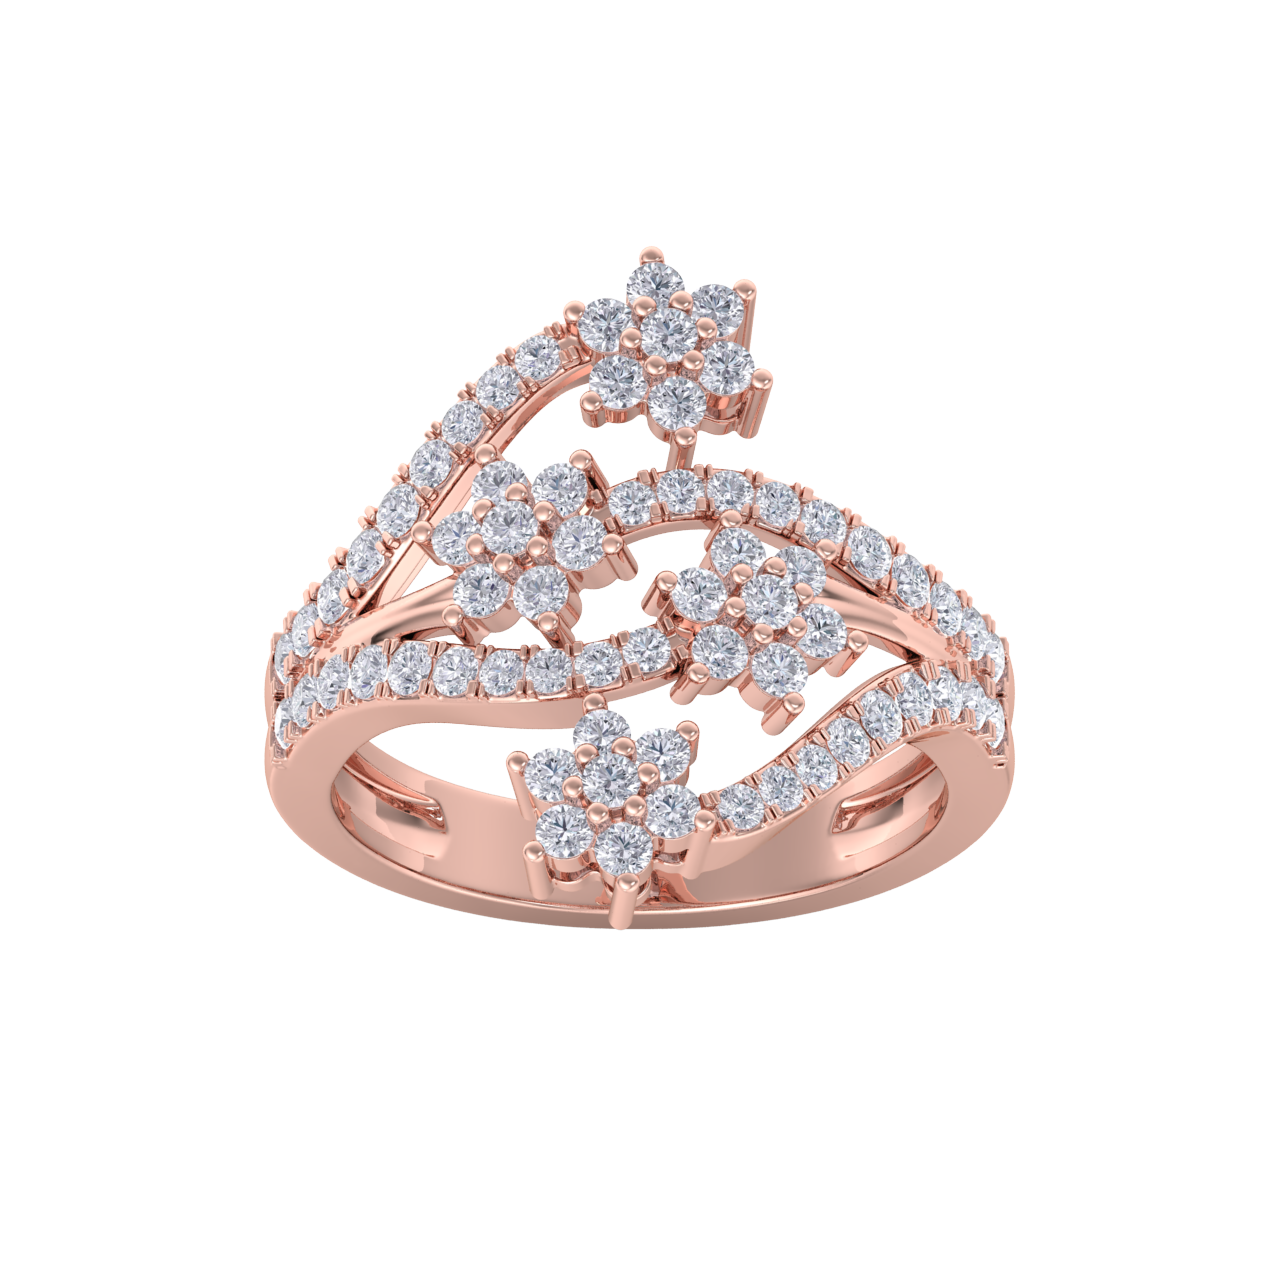 Diamond ring in rose gold with white diamonds of 0.90 ct in weight